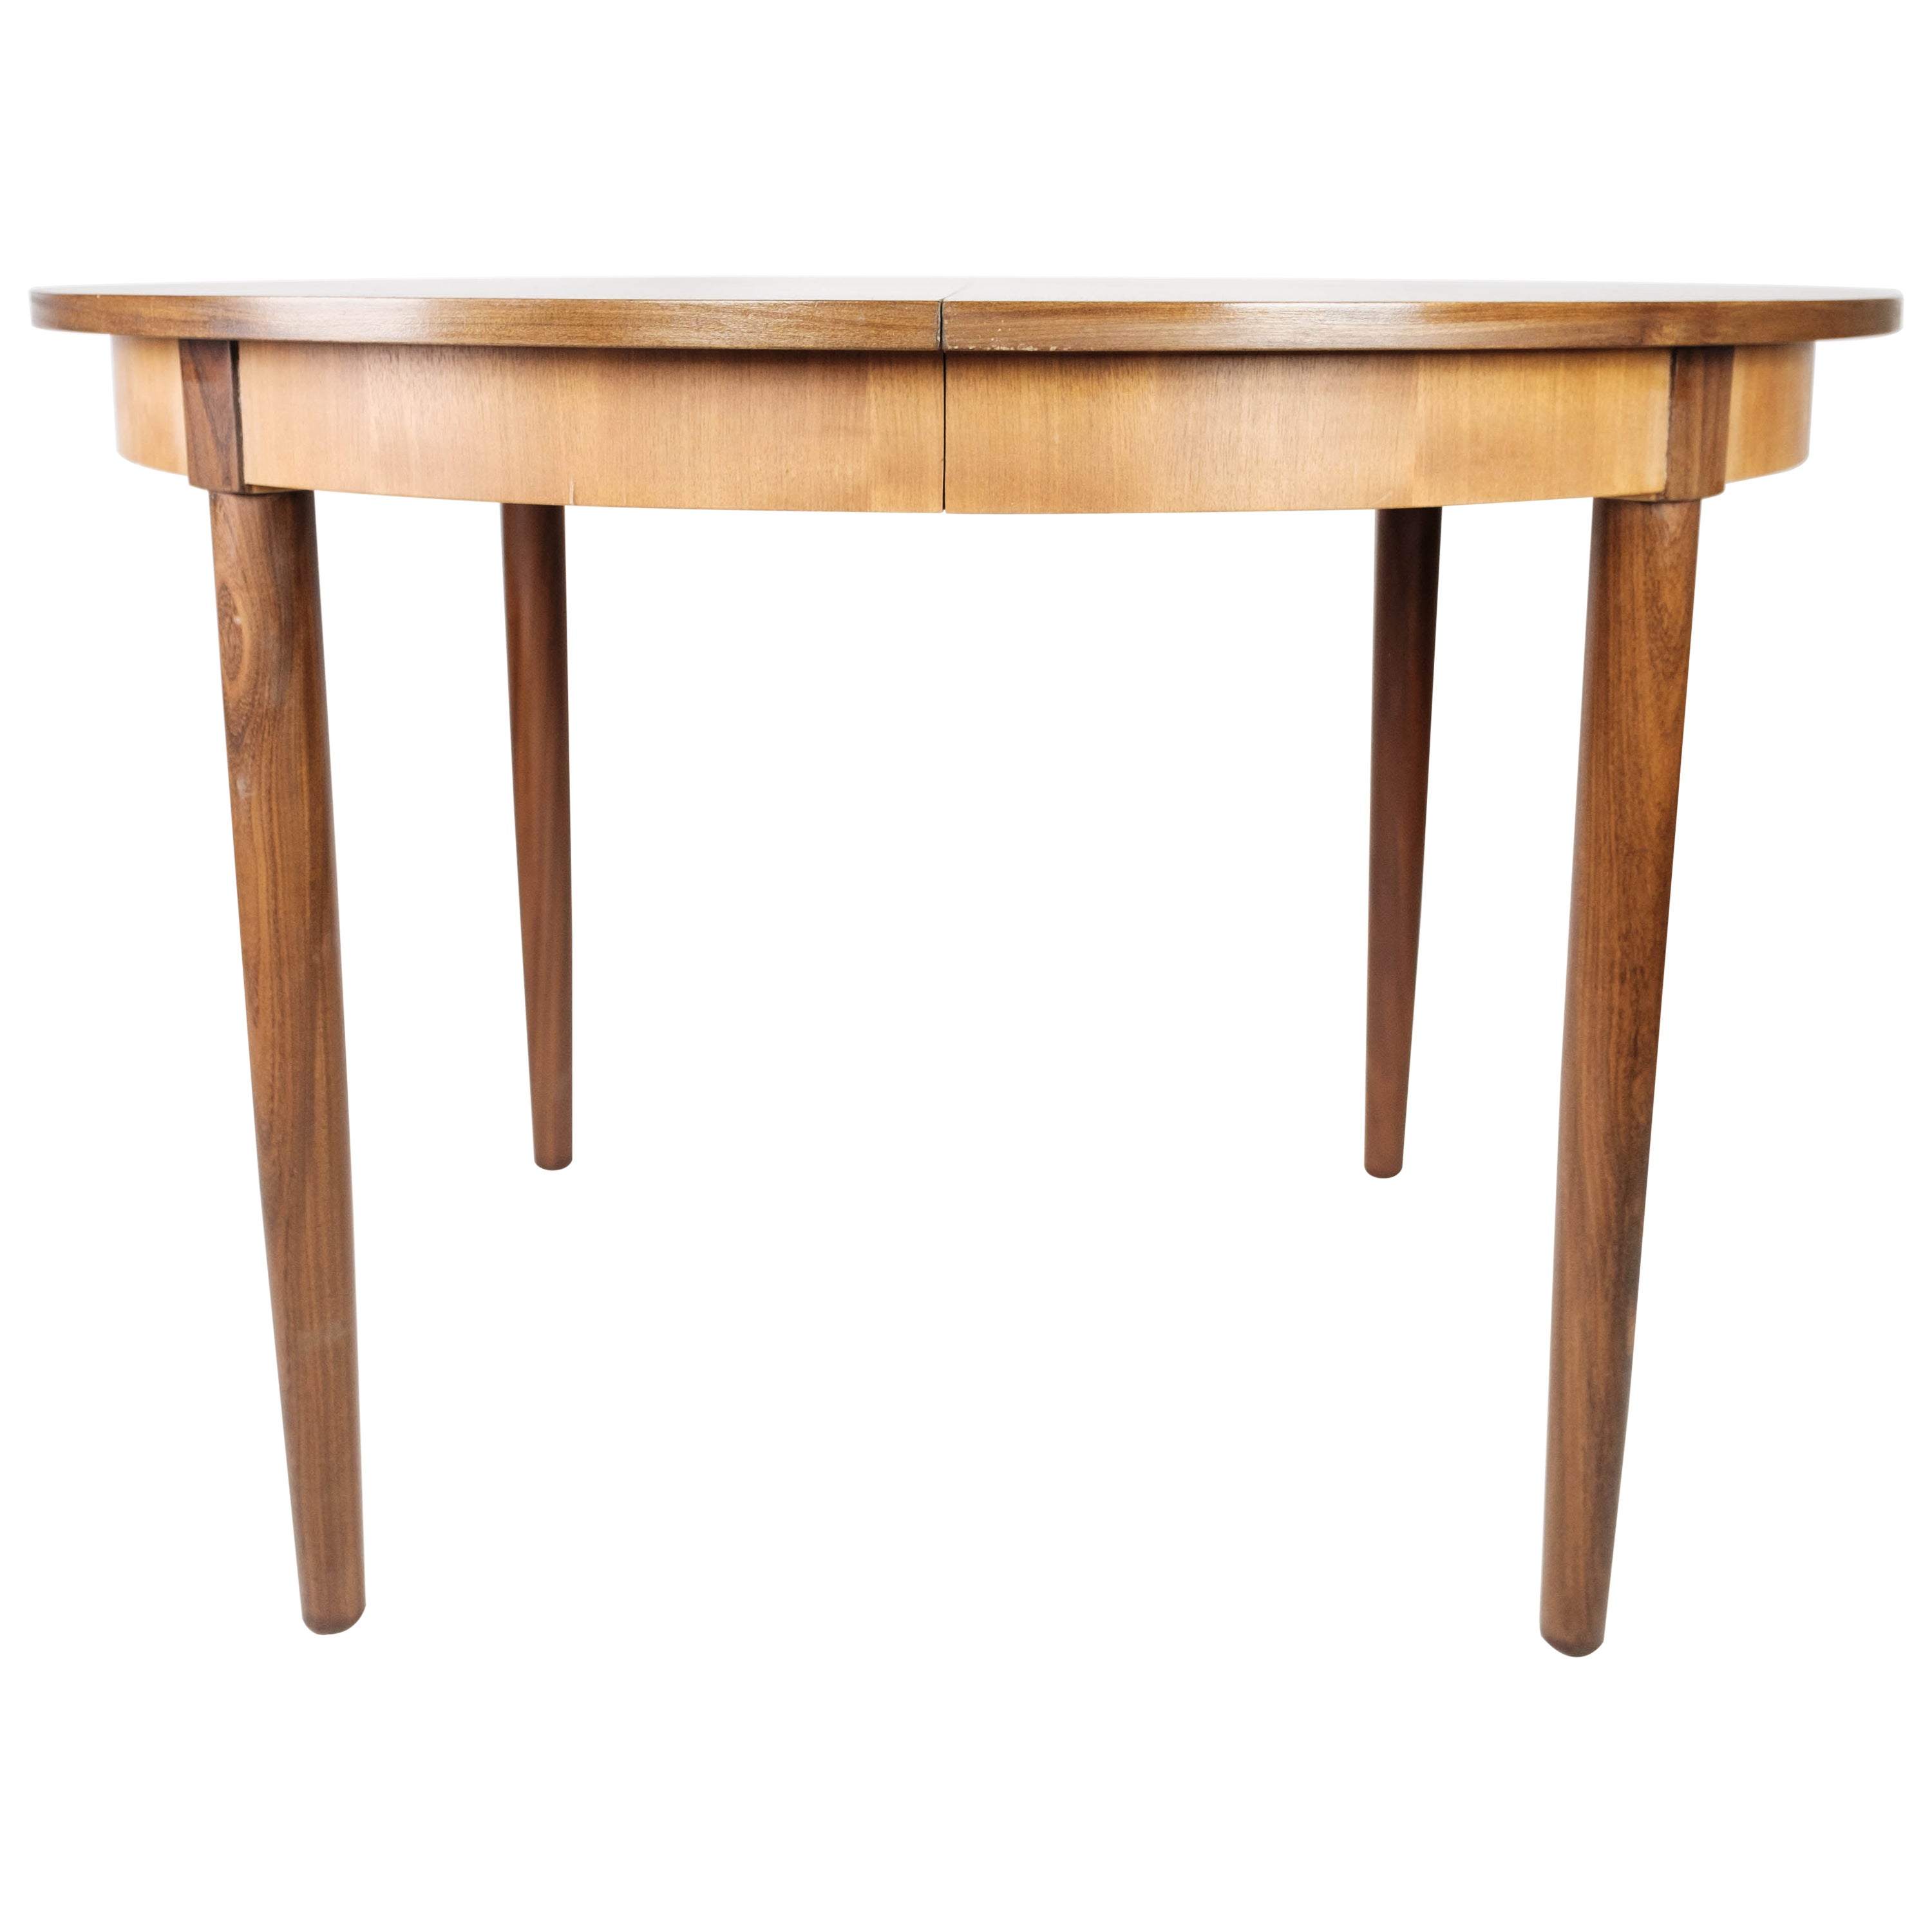 Dining Table Made In Teak With Extensions, Danish Design From 1960s For Sale